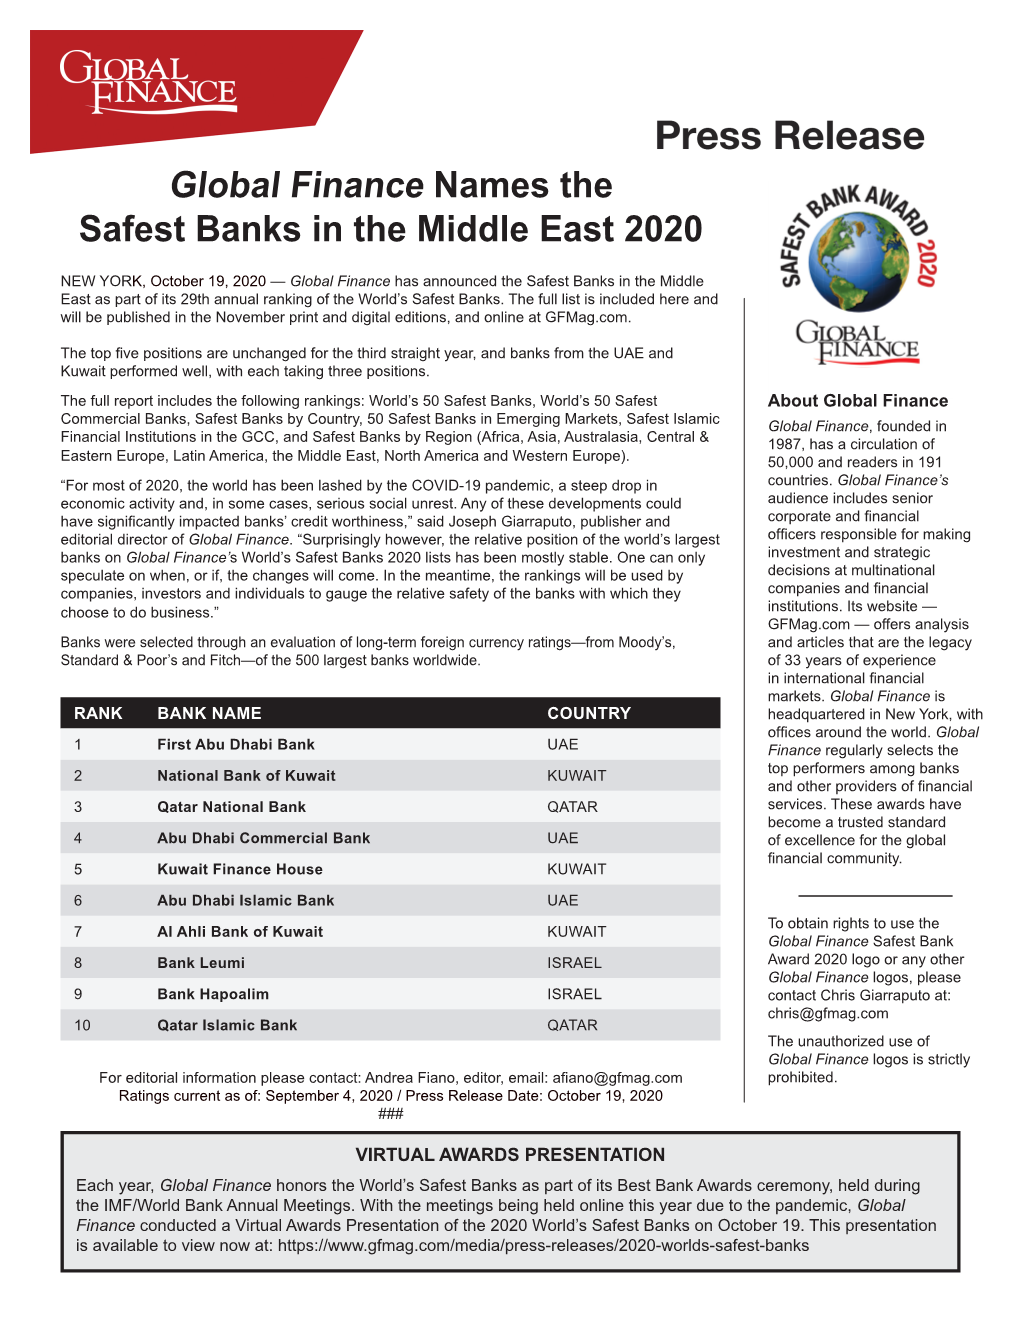 Global Finance Names the Safest Banks in the Middle East 2020